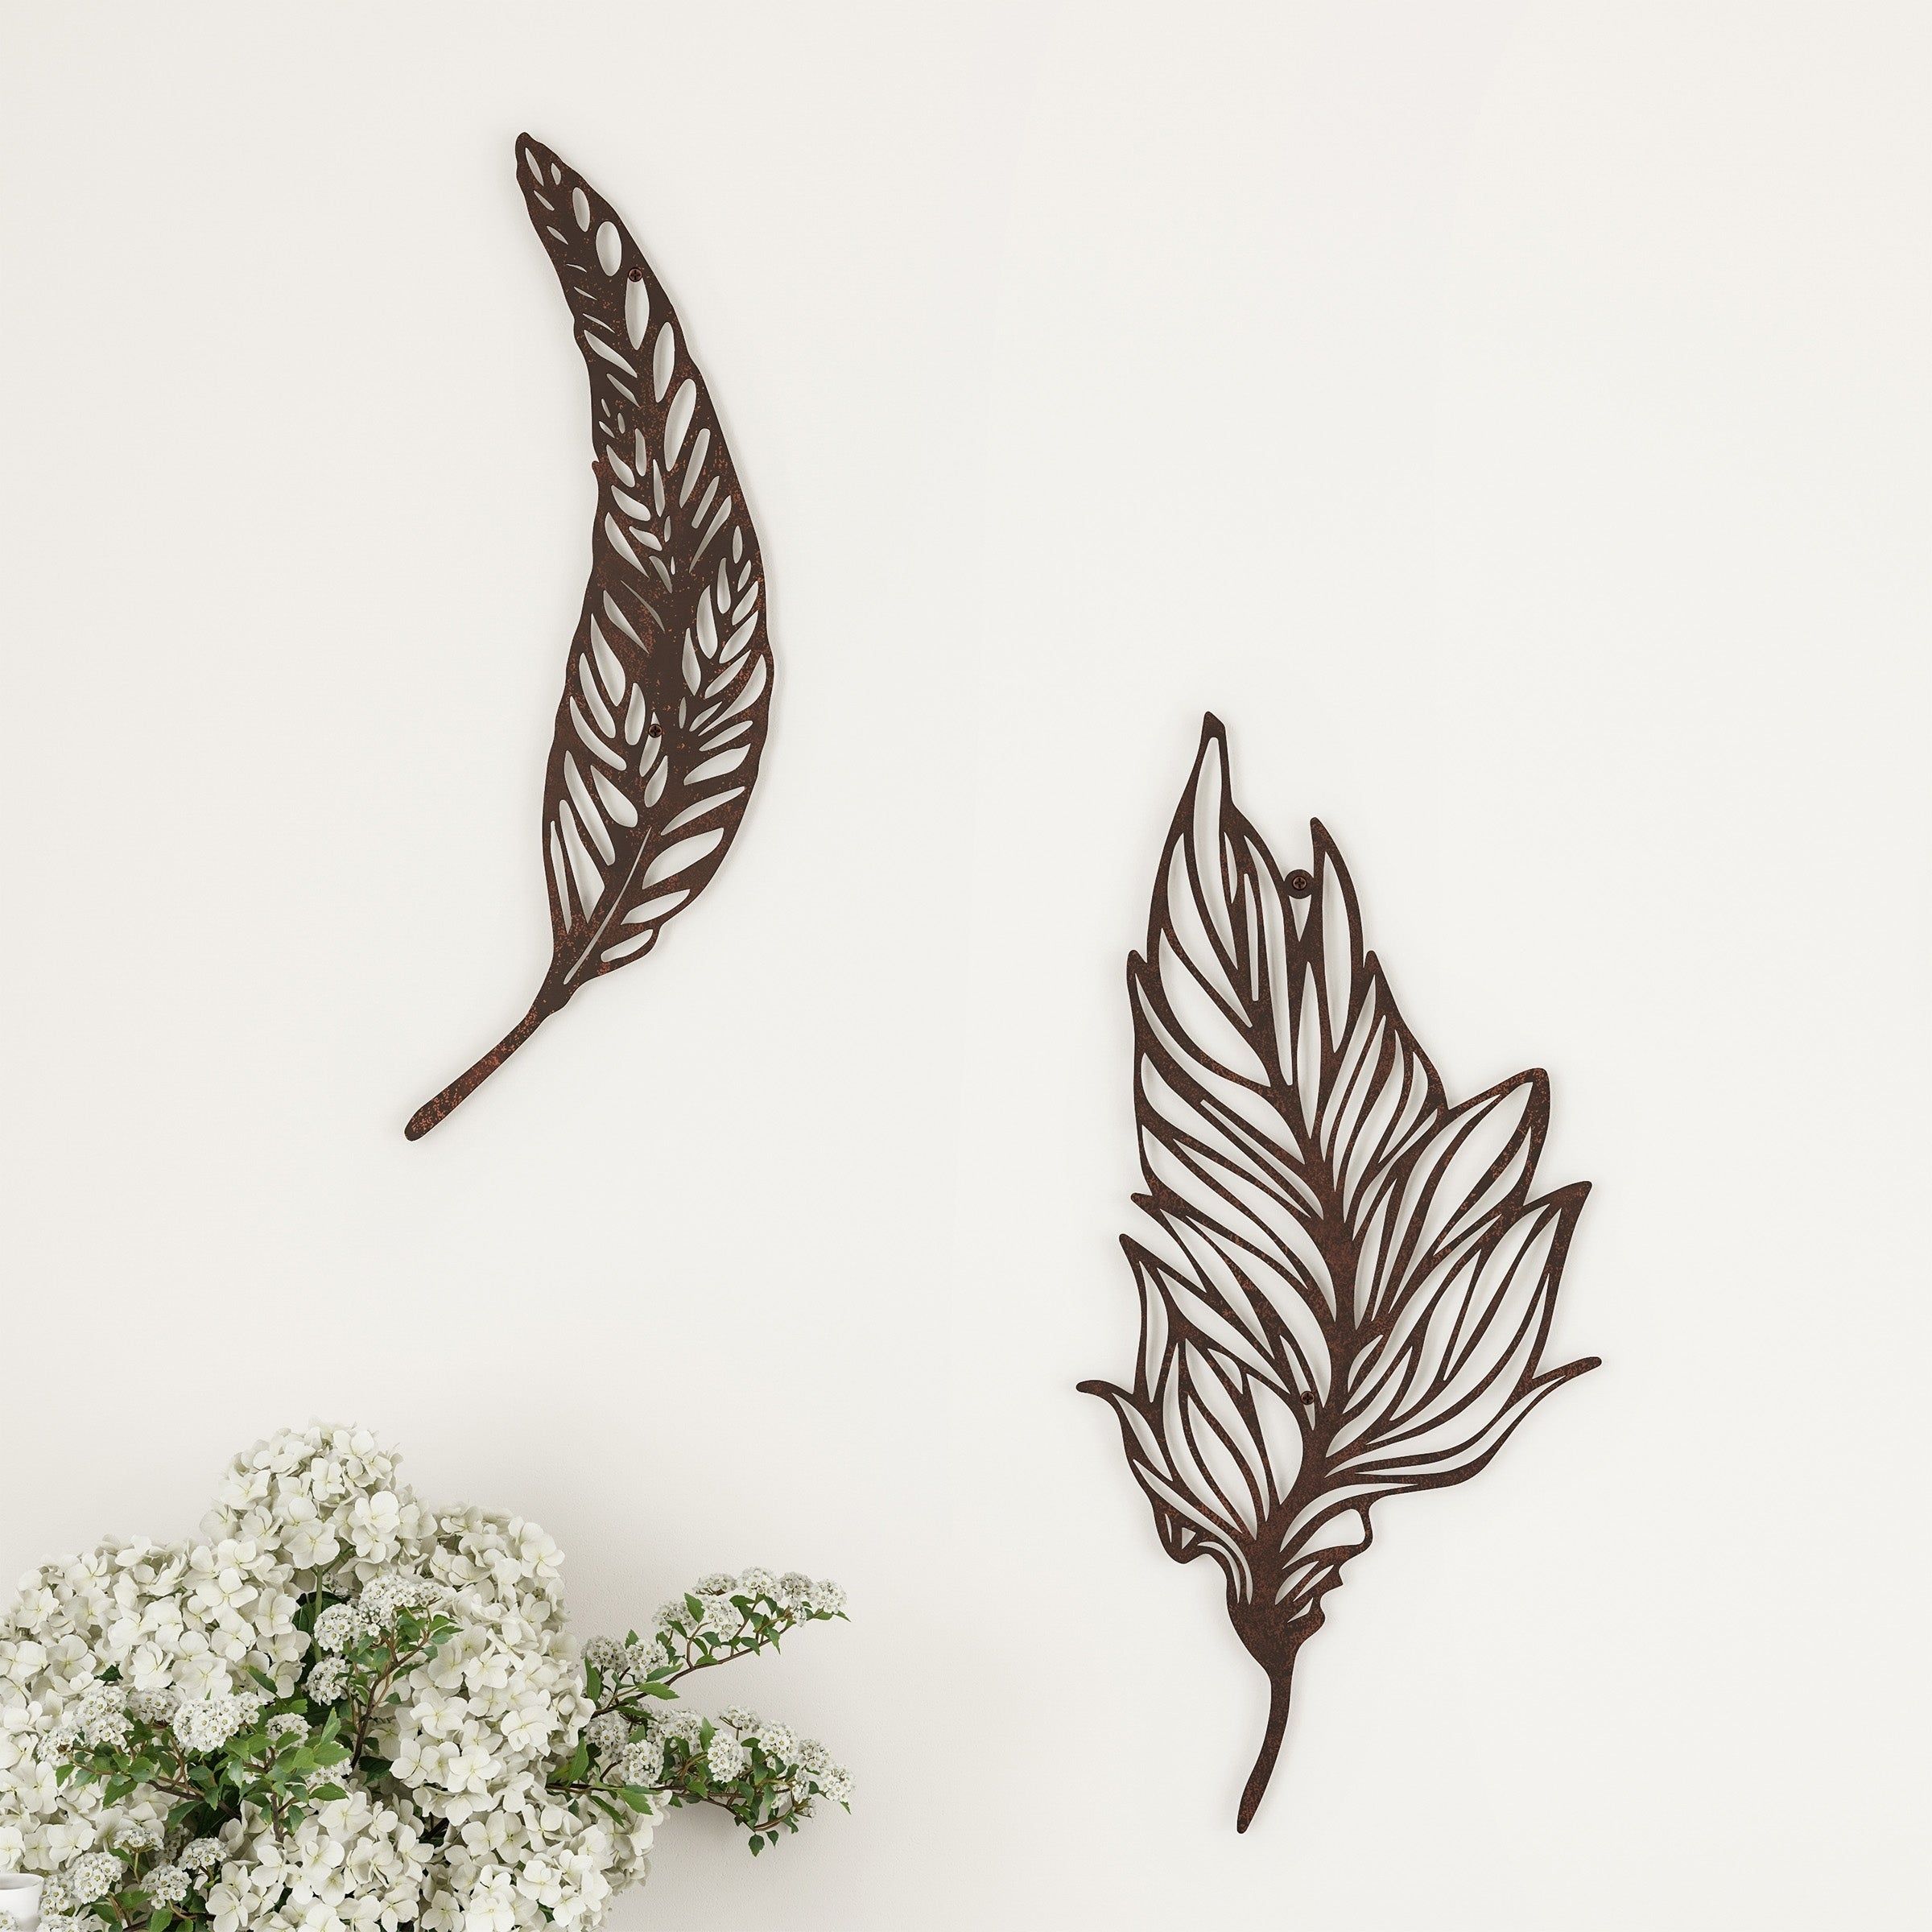 Wall Decor Set Of 2 Metal Feather Hanging Contemporary Wall Art For Living  Room, Bedroom, Kitchenlavish Home (brown) With Regard To 4 Piece Metal Wall Plaque Decor Sets (View 25 of 30)